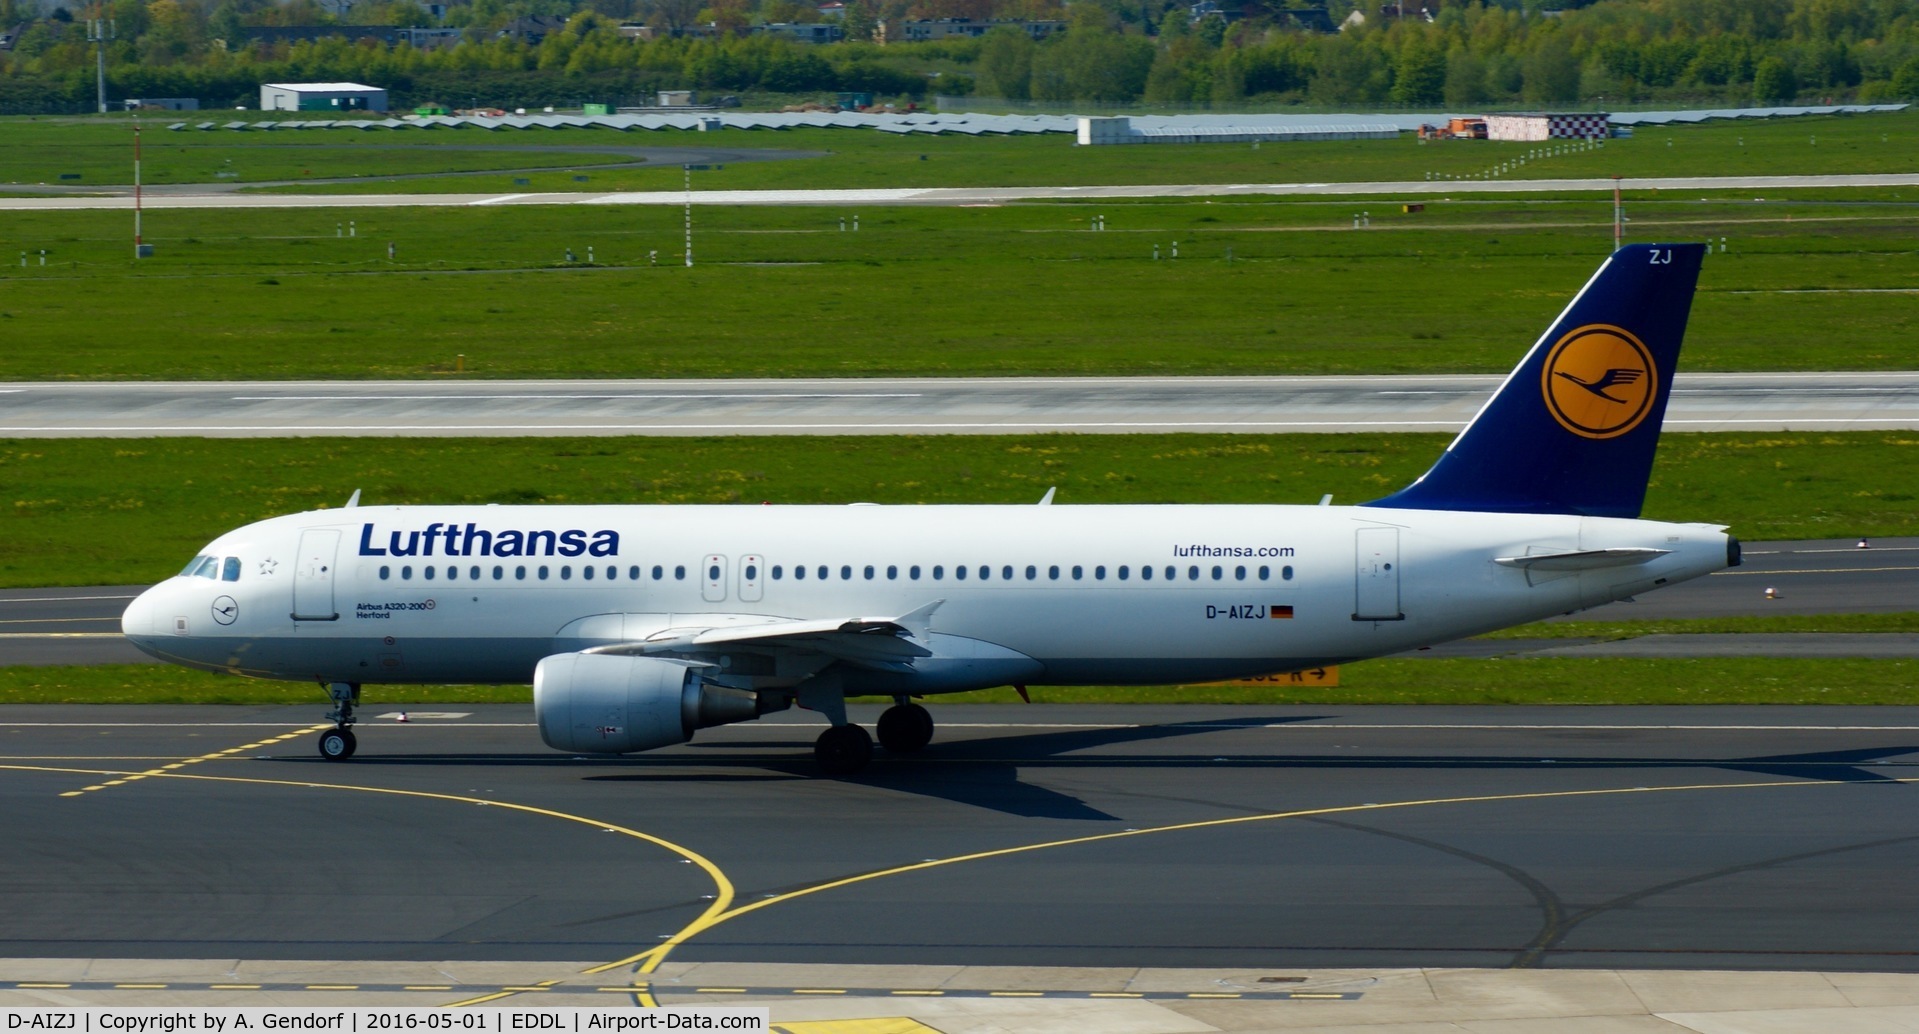 D-AIZJ, 2010 Airbus A320-214 C/N 4449, Lufthansa, is here on taxiway 